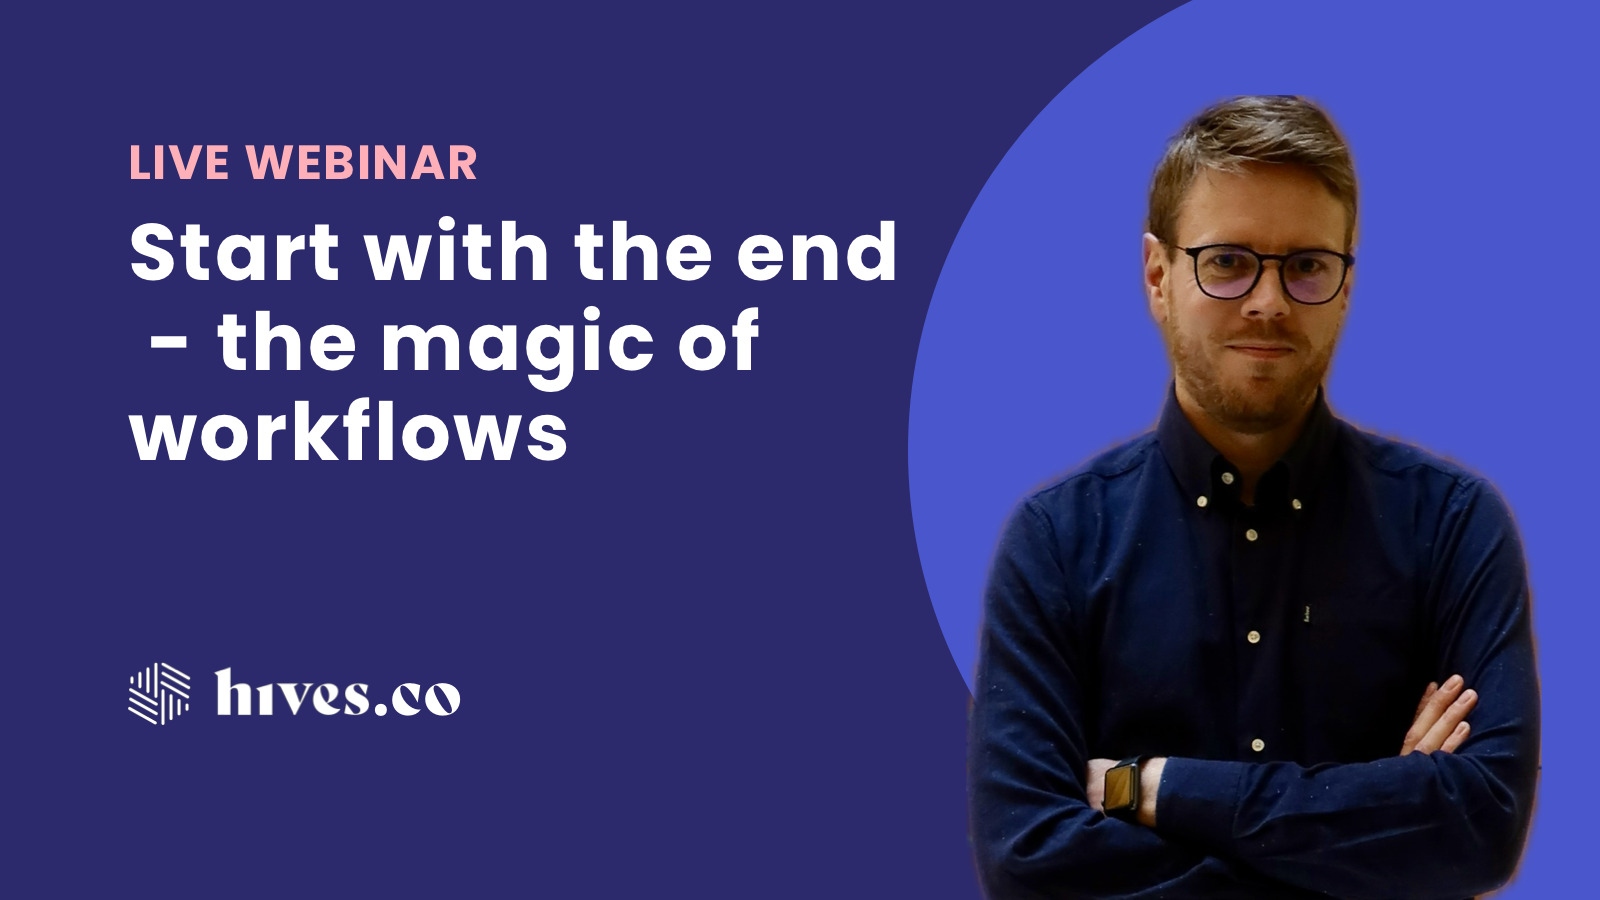 Start with the end - the magic of workflows